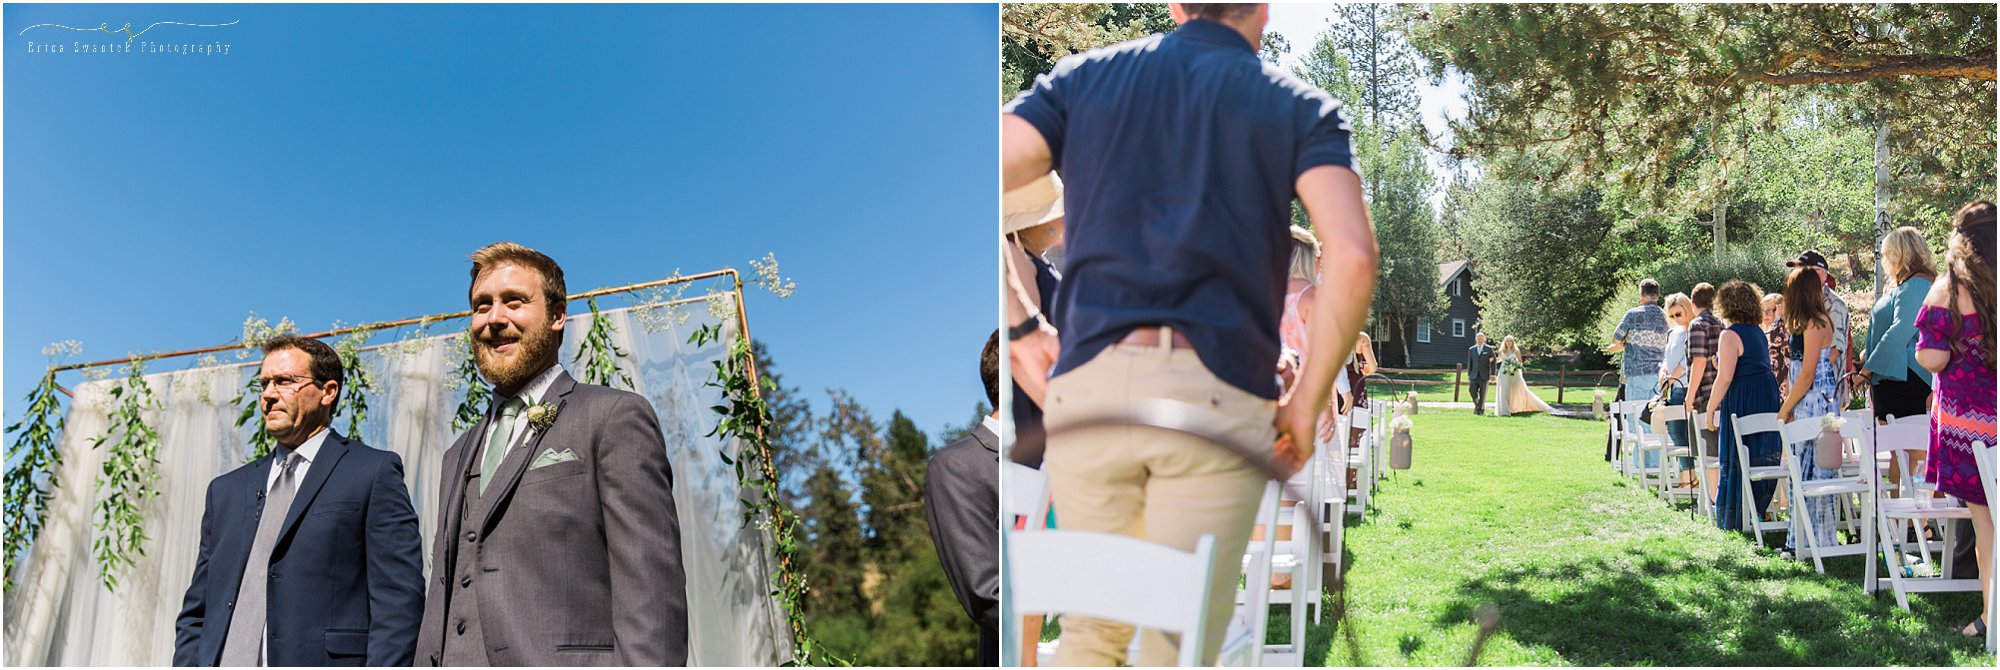 A groom sees his bride walking down the aisle towards him at this vintage rustic chic Bend wedding at Aspen Hall. | Erica Swantek Photography